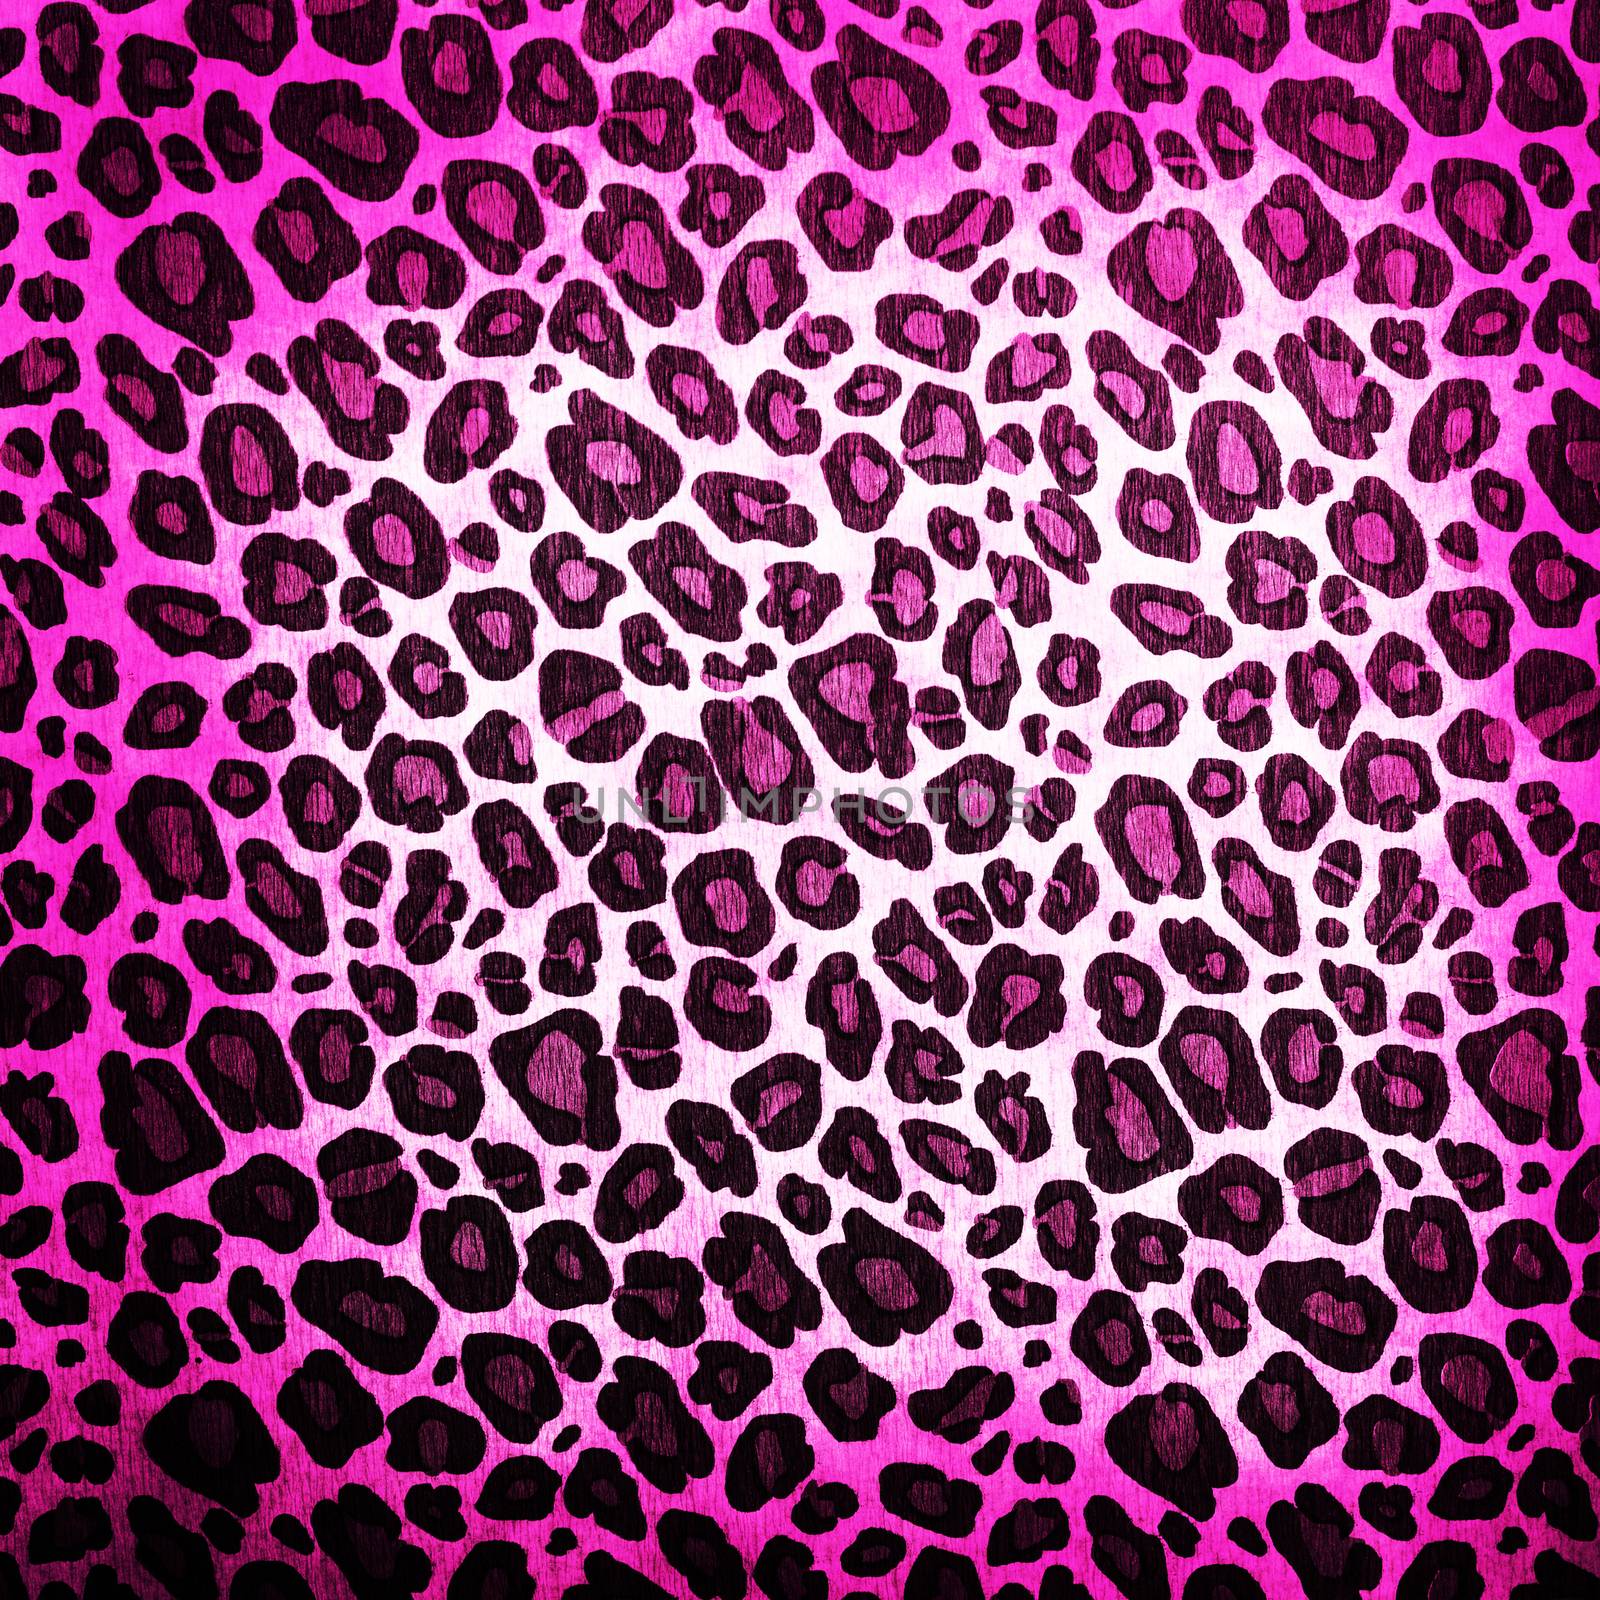 Leopard pattern background or texture close up